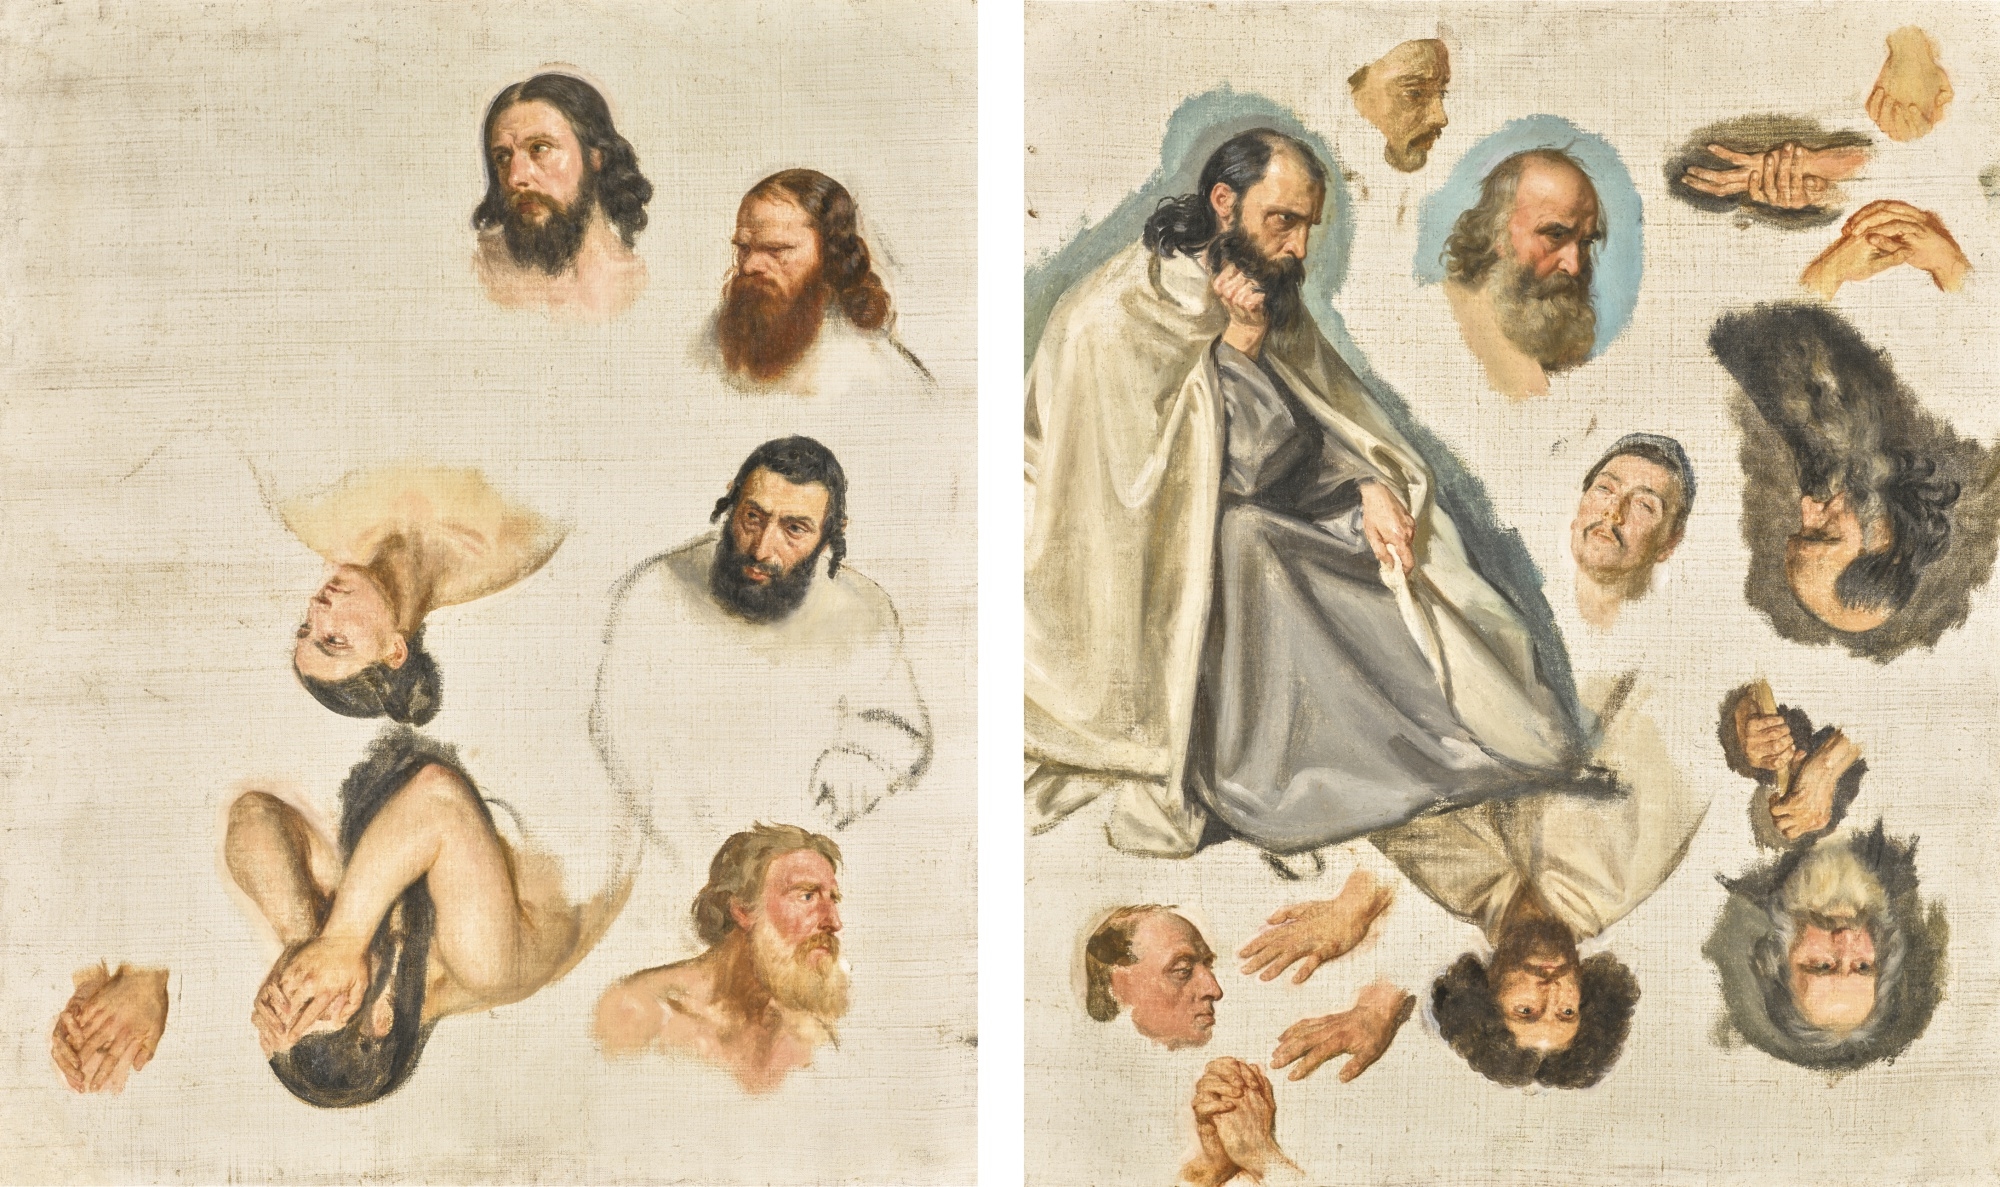 2 WORKS: STUDIES FOR A SEATED MAN, HEADS AND HANDS by Paul Delaroche